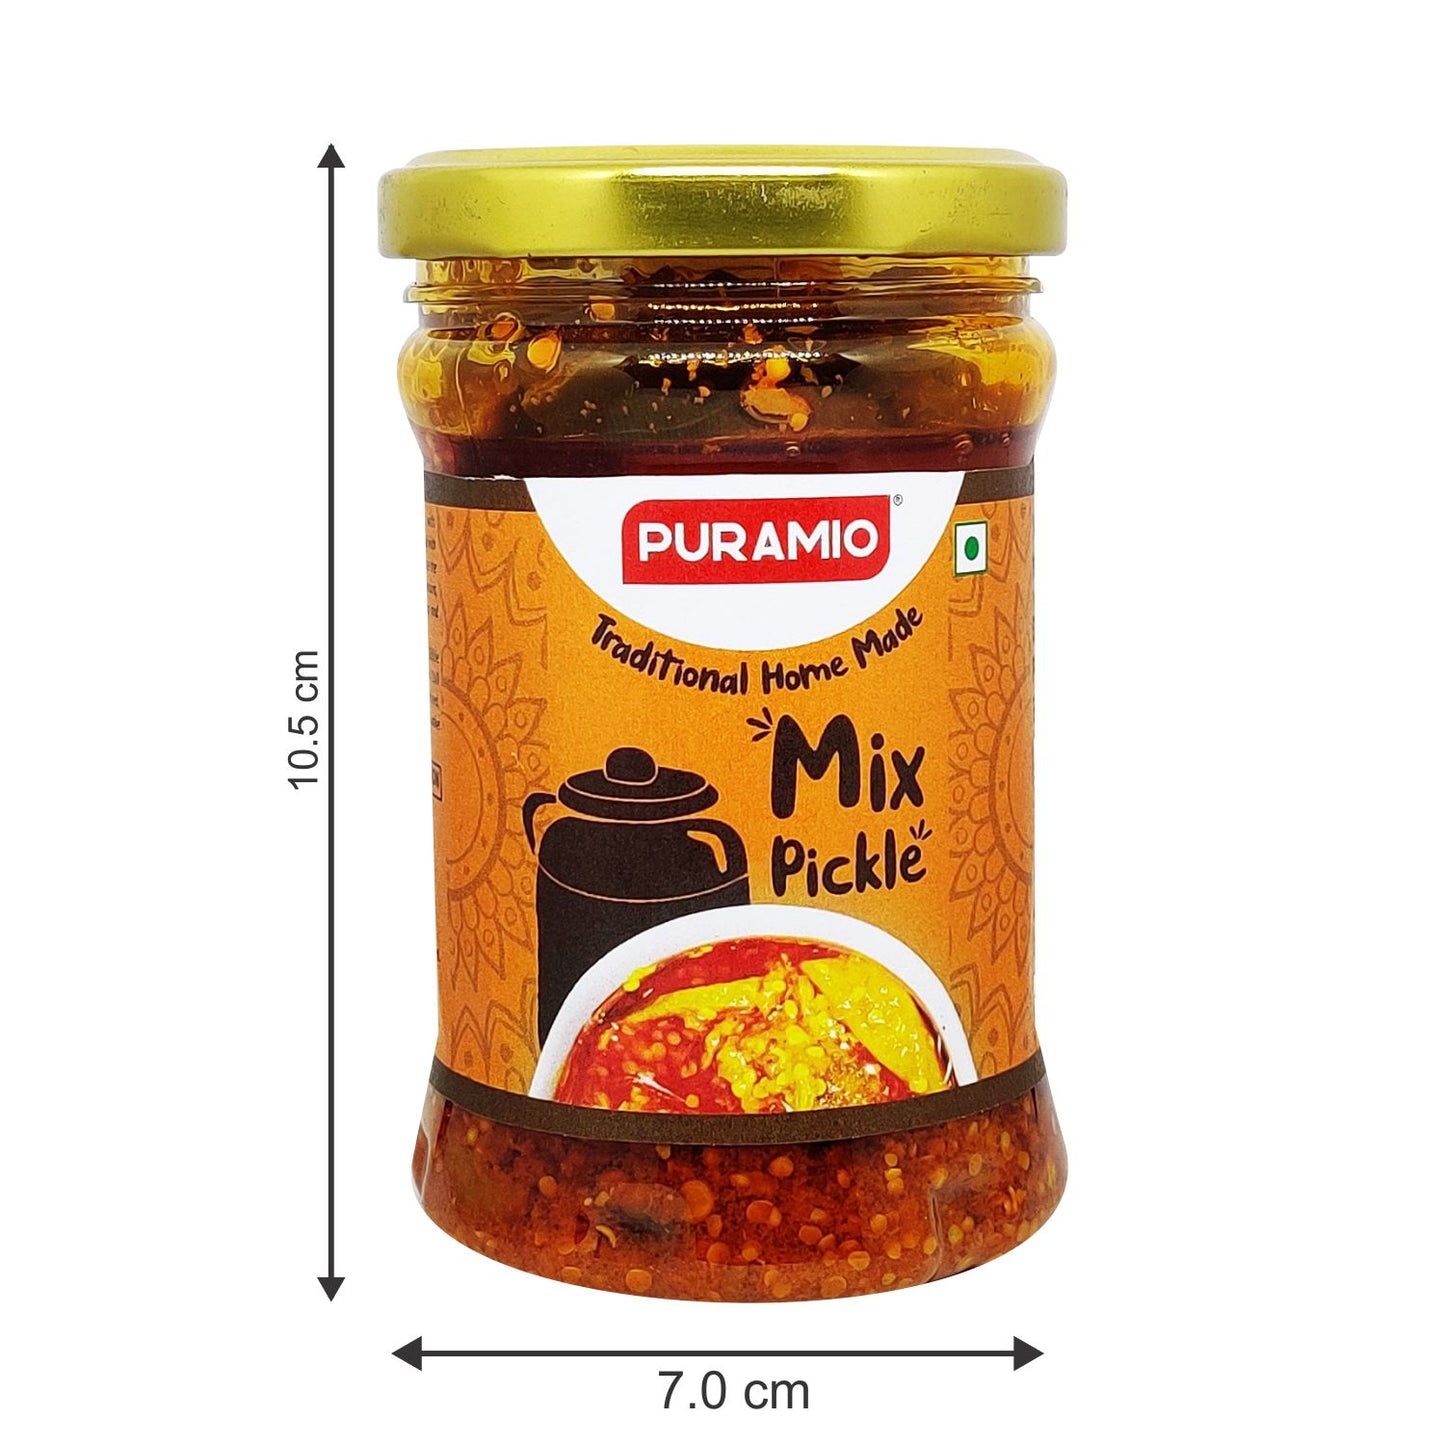 Puramio "Traditional Home Made Mixed Pickle", 275gm